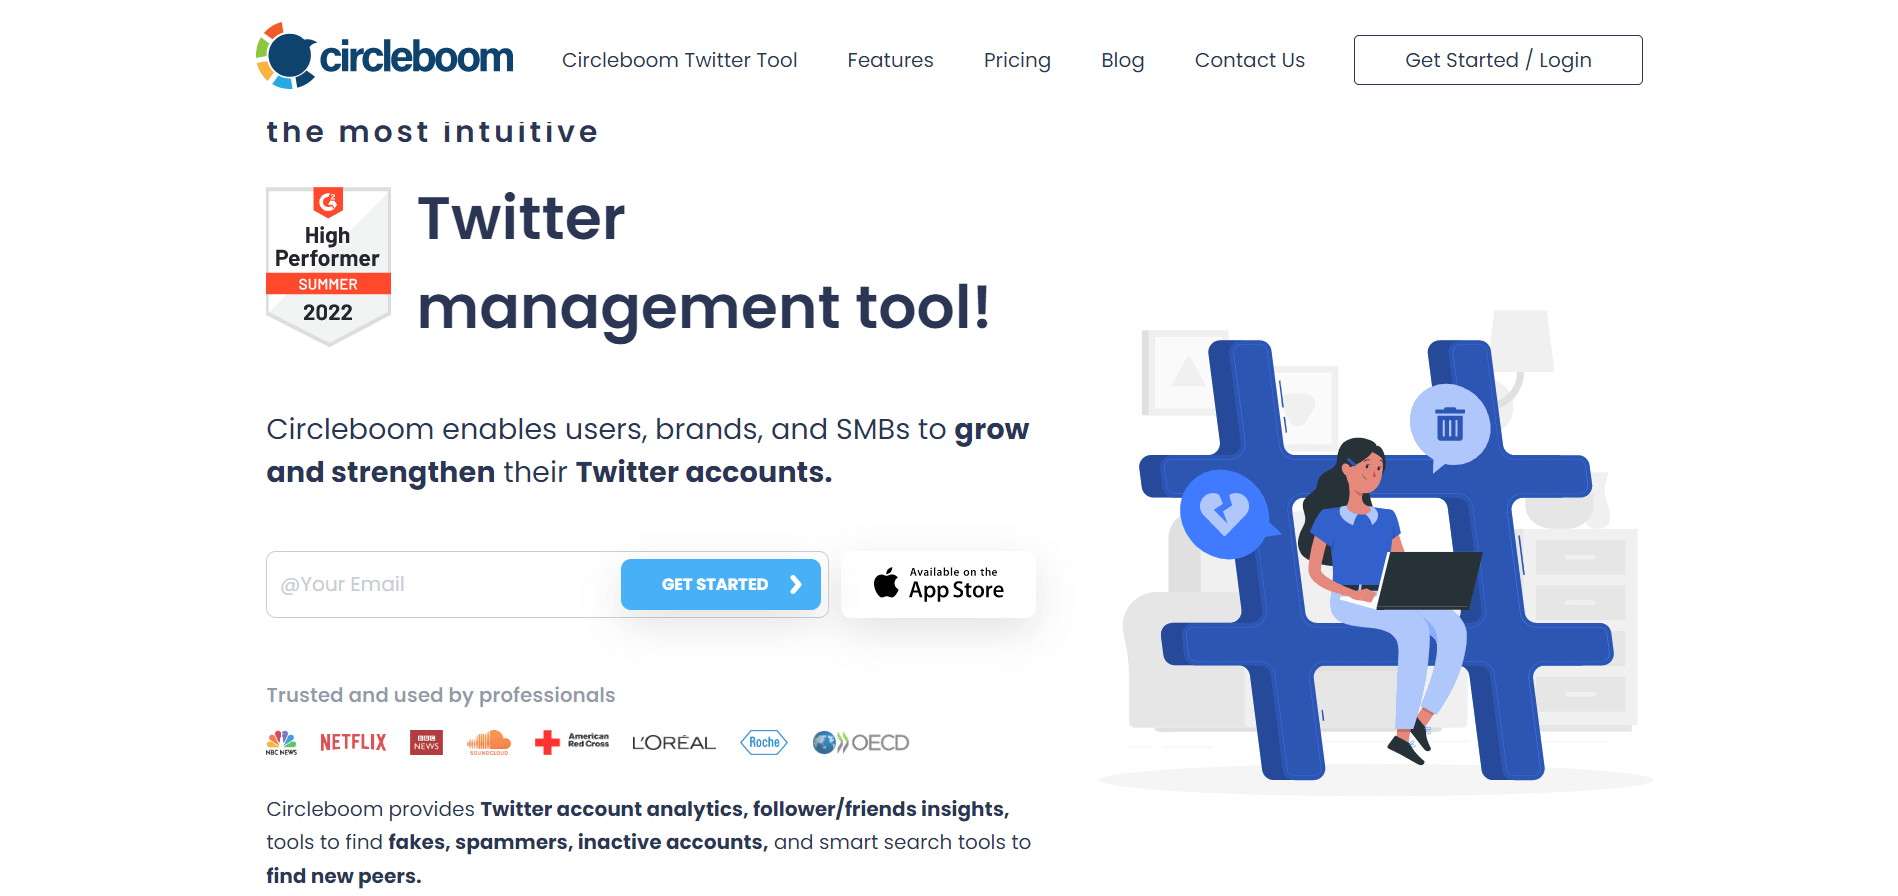 Circleboom Twitter is one of the most comprehensive Twitter analytics tools with outstanding features.